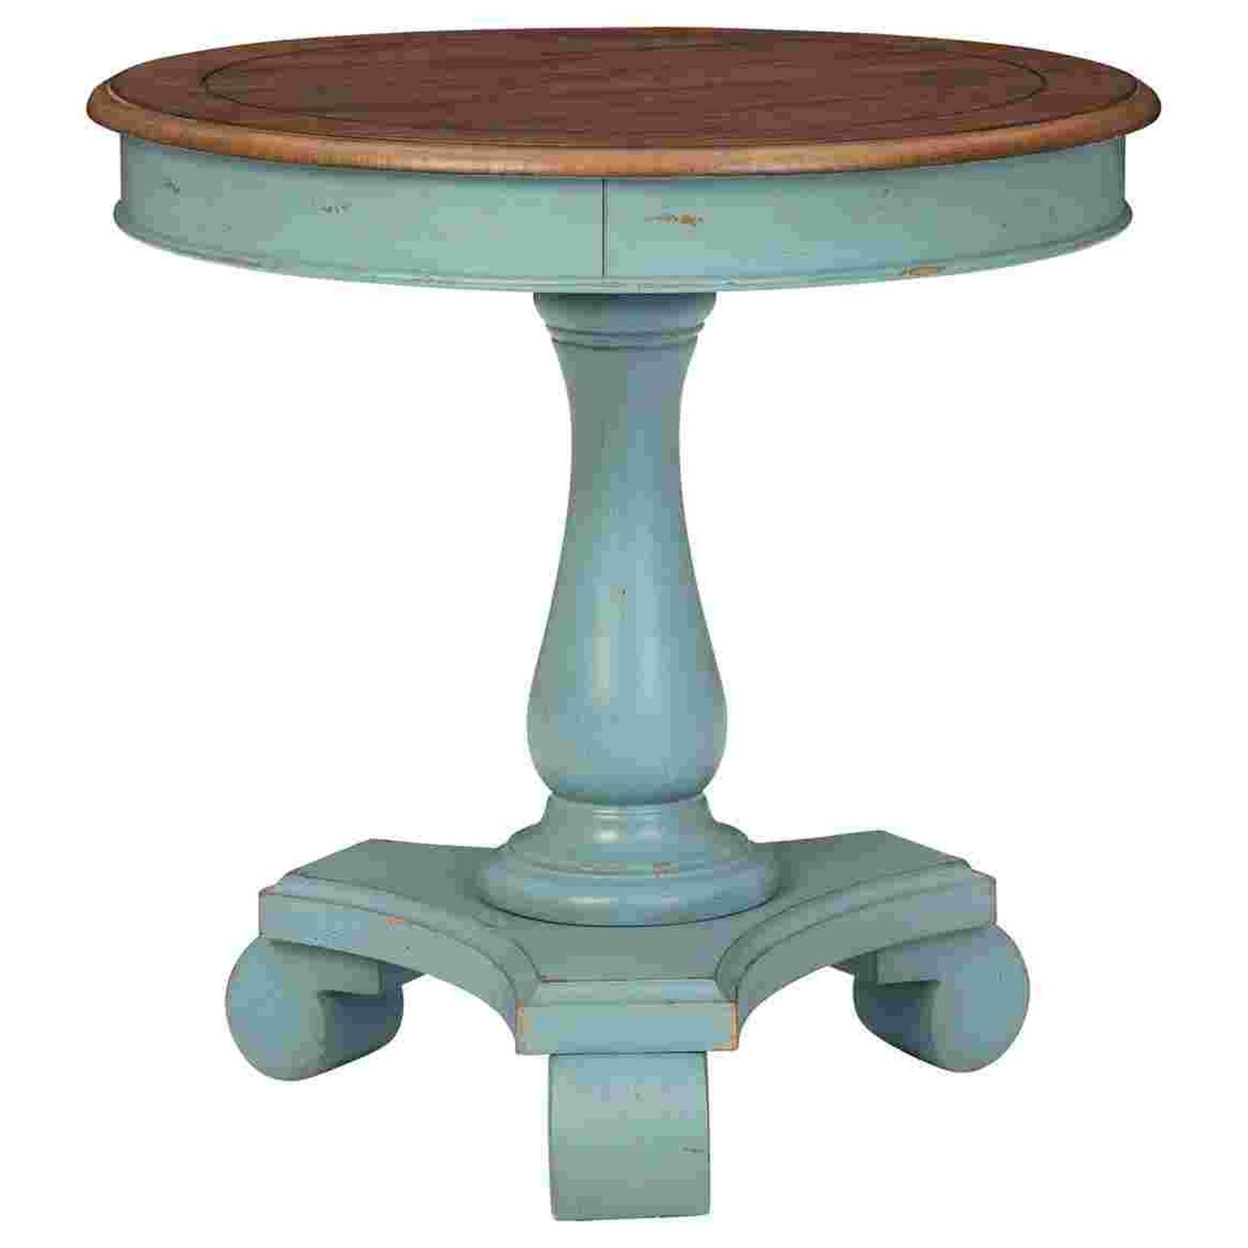 Wooden Accent Table With Round Tabletop, Teal Blue And Brown- Saltoro Sherpi